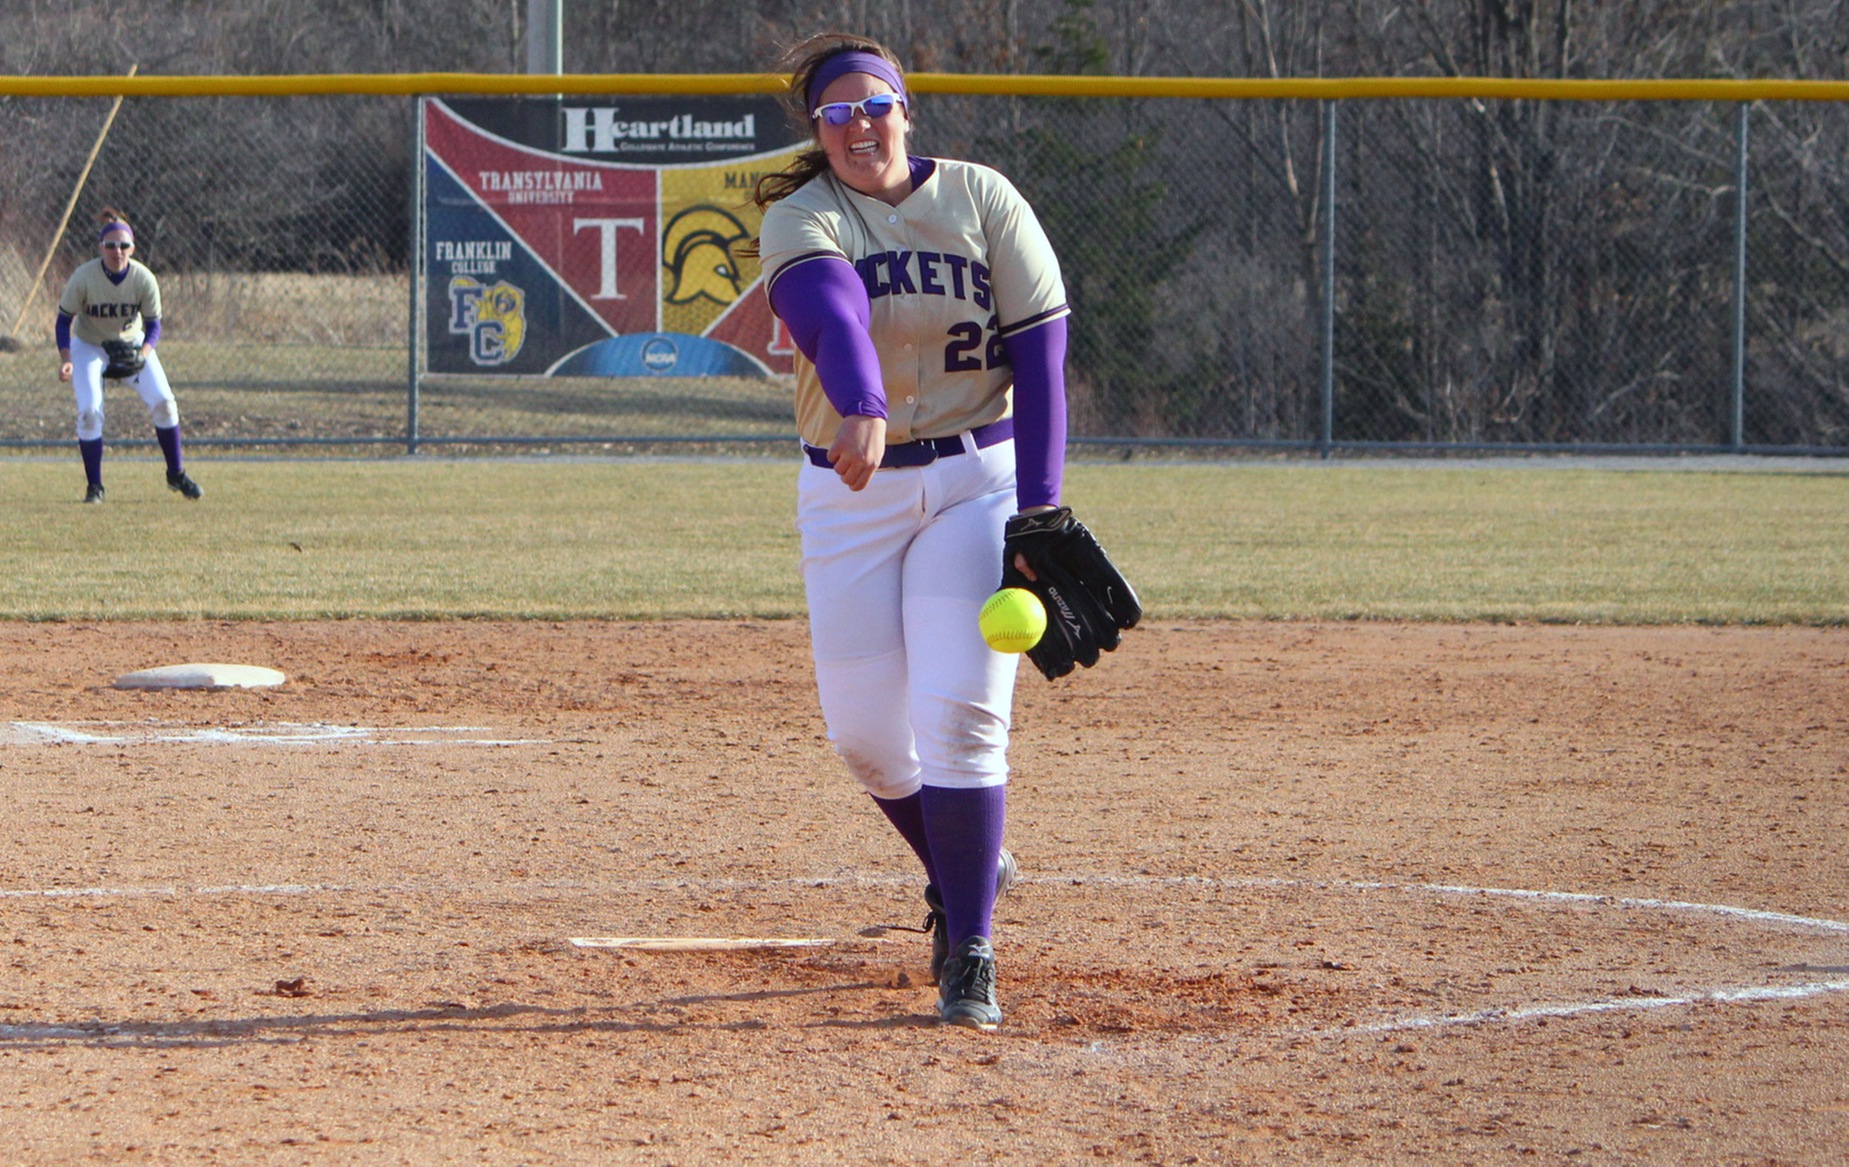 DC splits with Denison in Sunday doubleheader